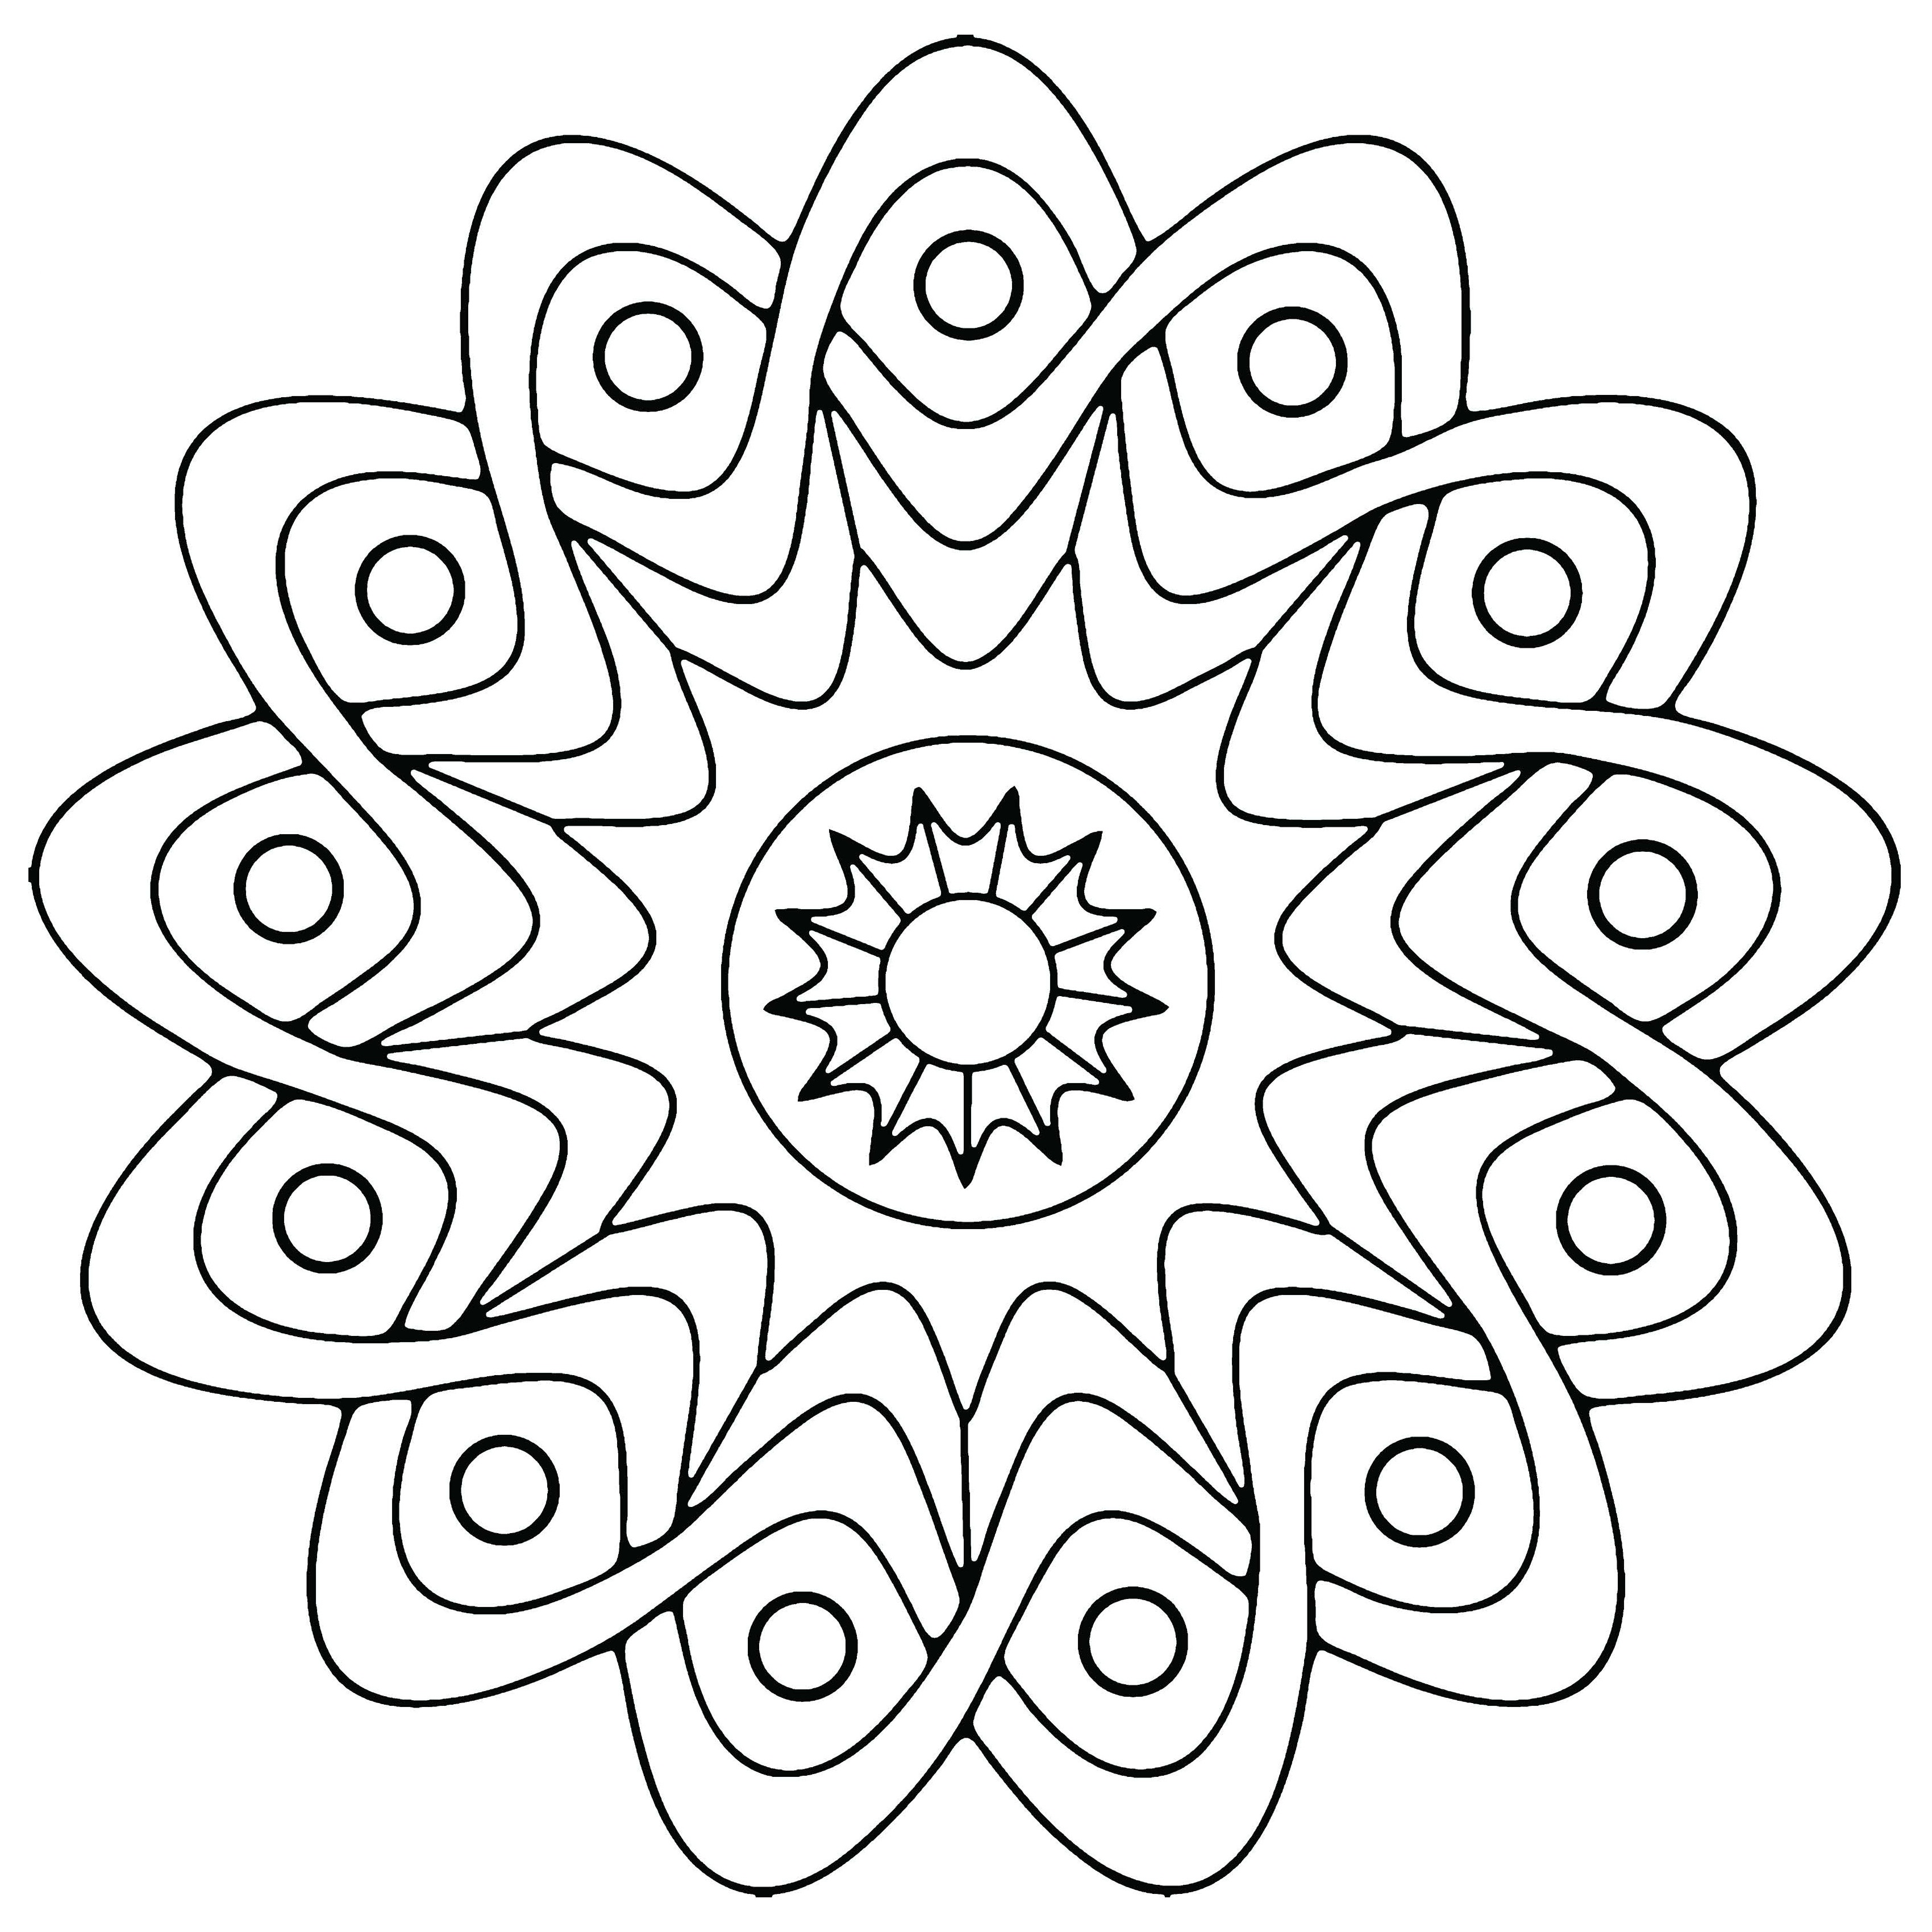 easy-online-coloring-simple-coloring-pages-to-download-and-print-for